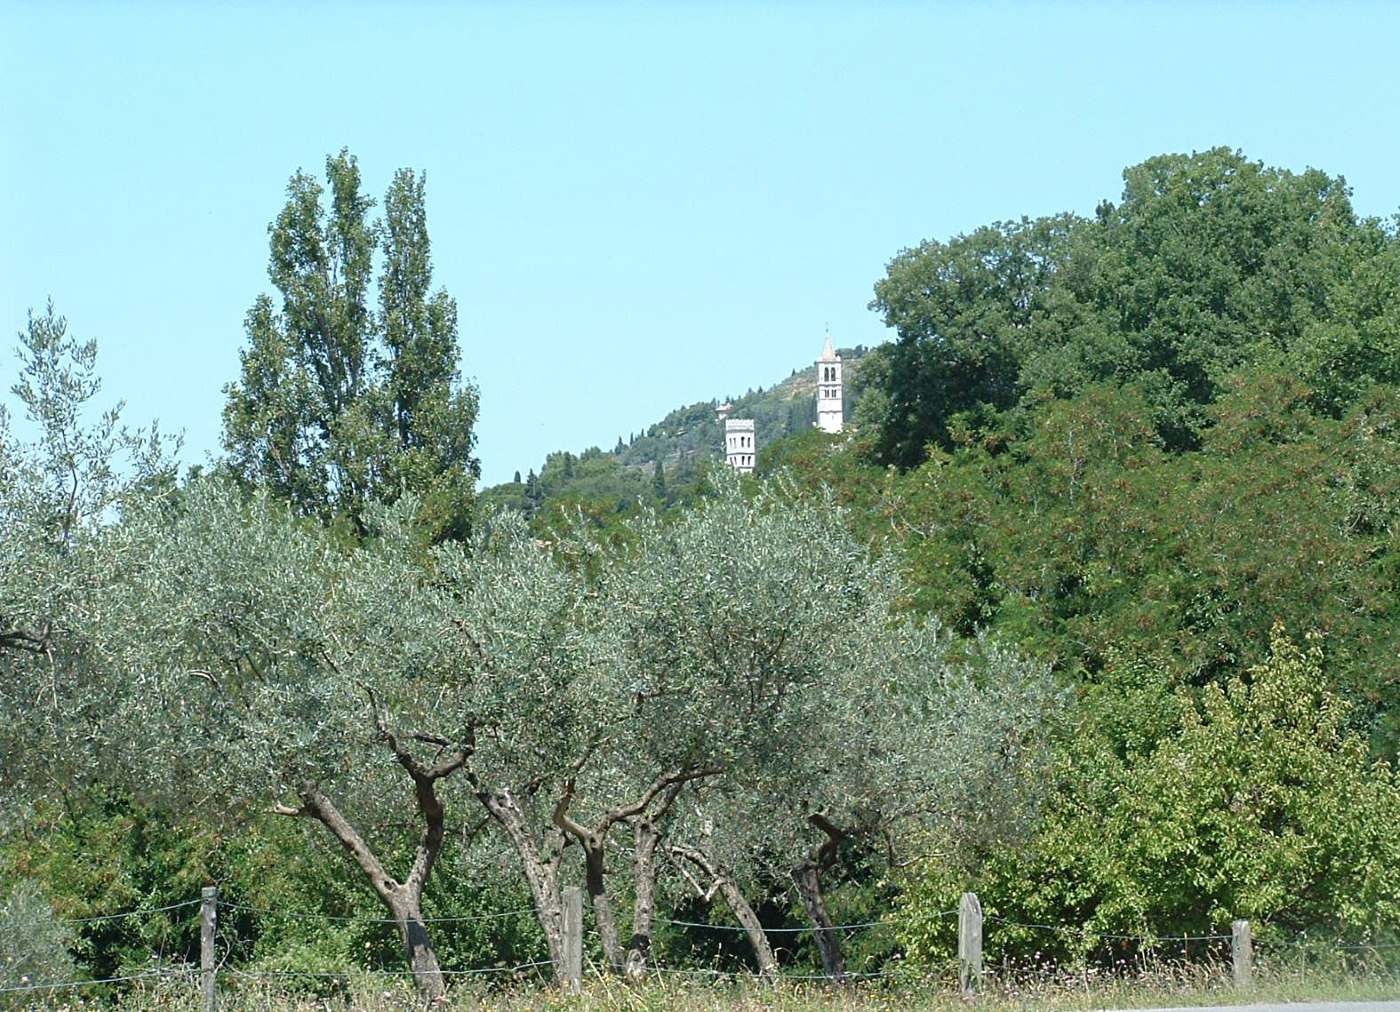 Towers of Assisi